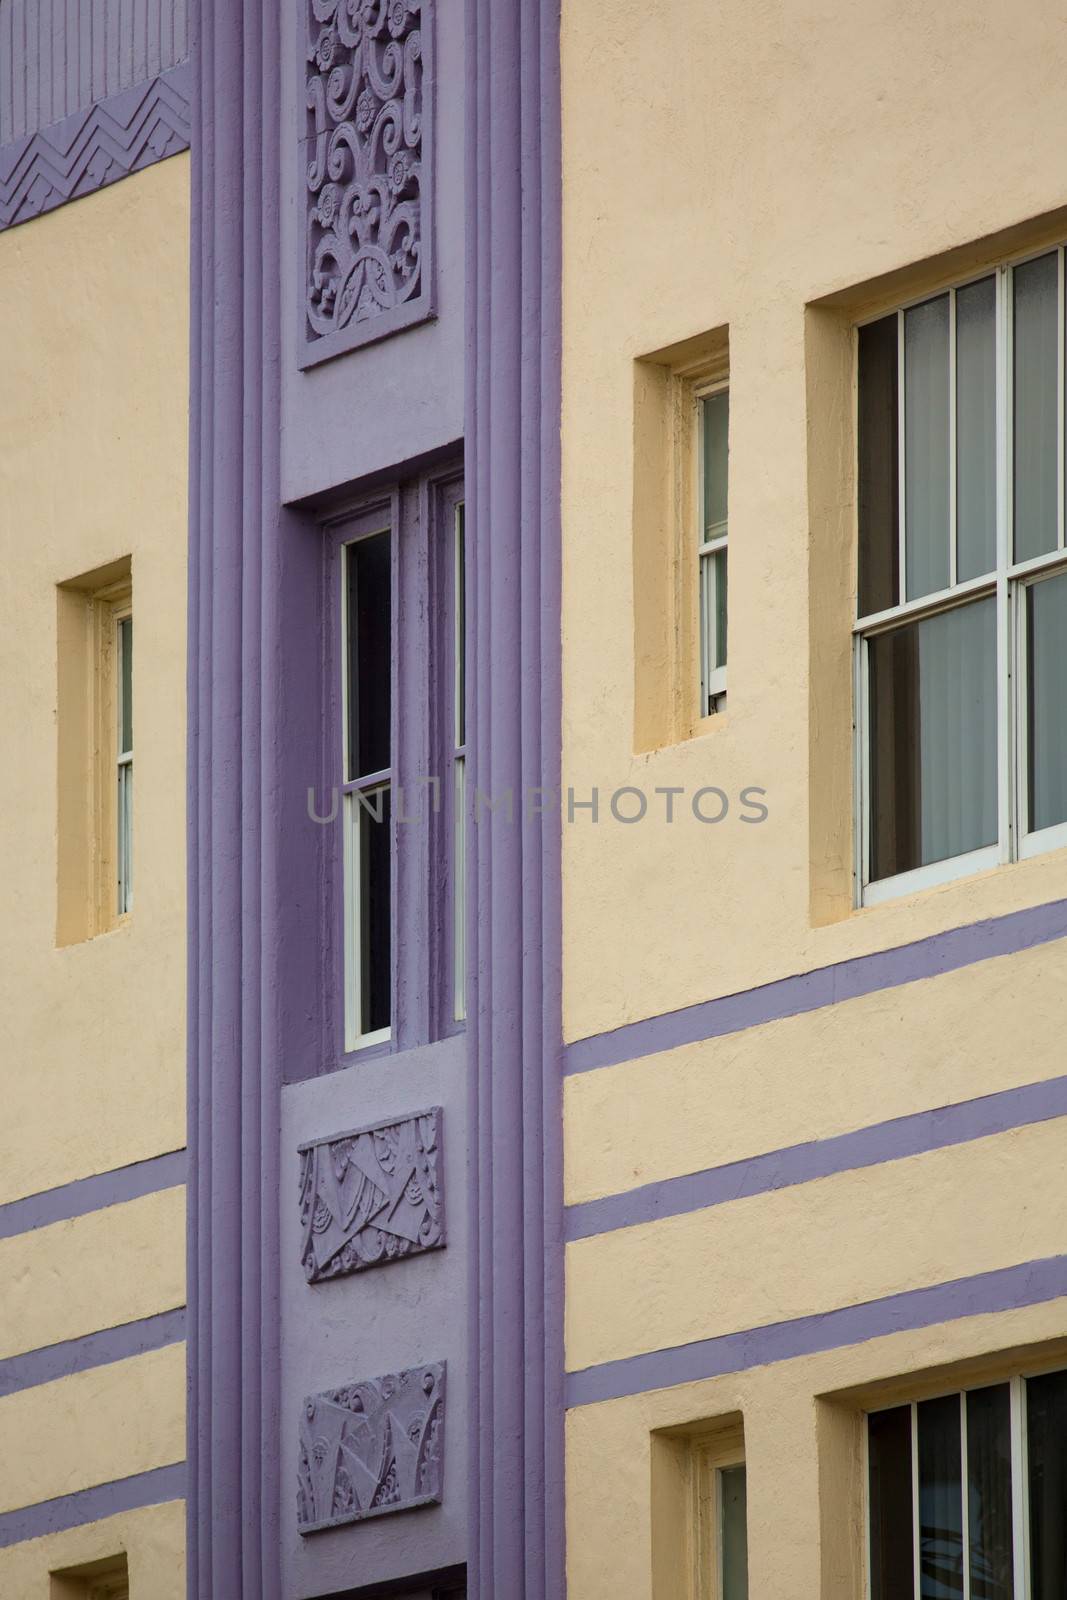 Detail of a classical art deco facade on Ocean drive in Miami Beach. Miami Beach's Art Deco District is the first 20th-century neighborhood to be recognized by the National Register of Historic Places, with 800 structures of historical significance, most built between 1923 and 1943.